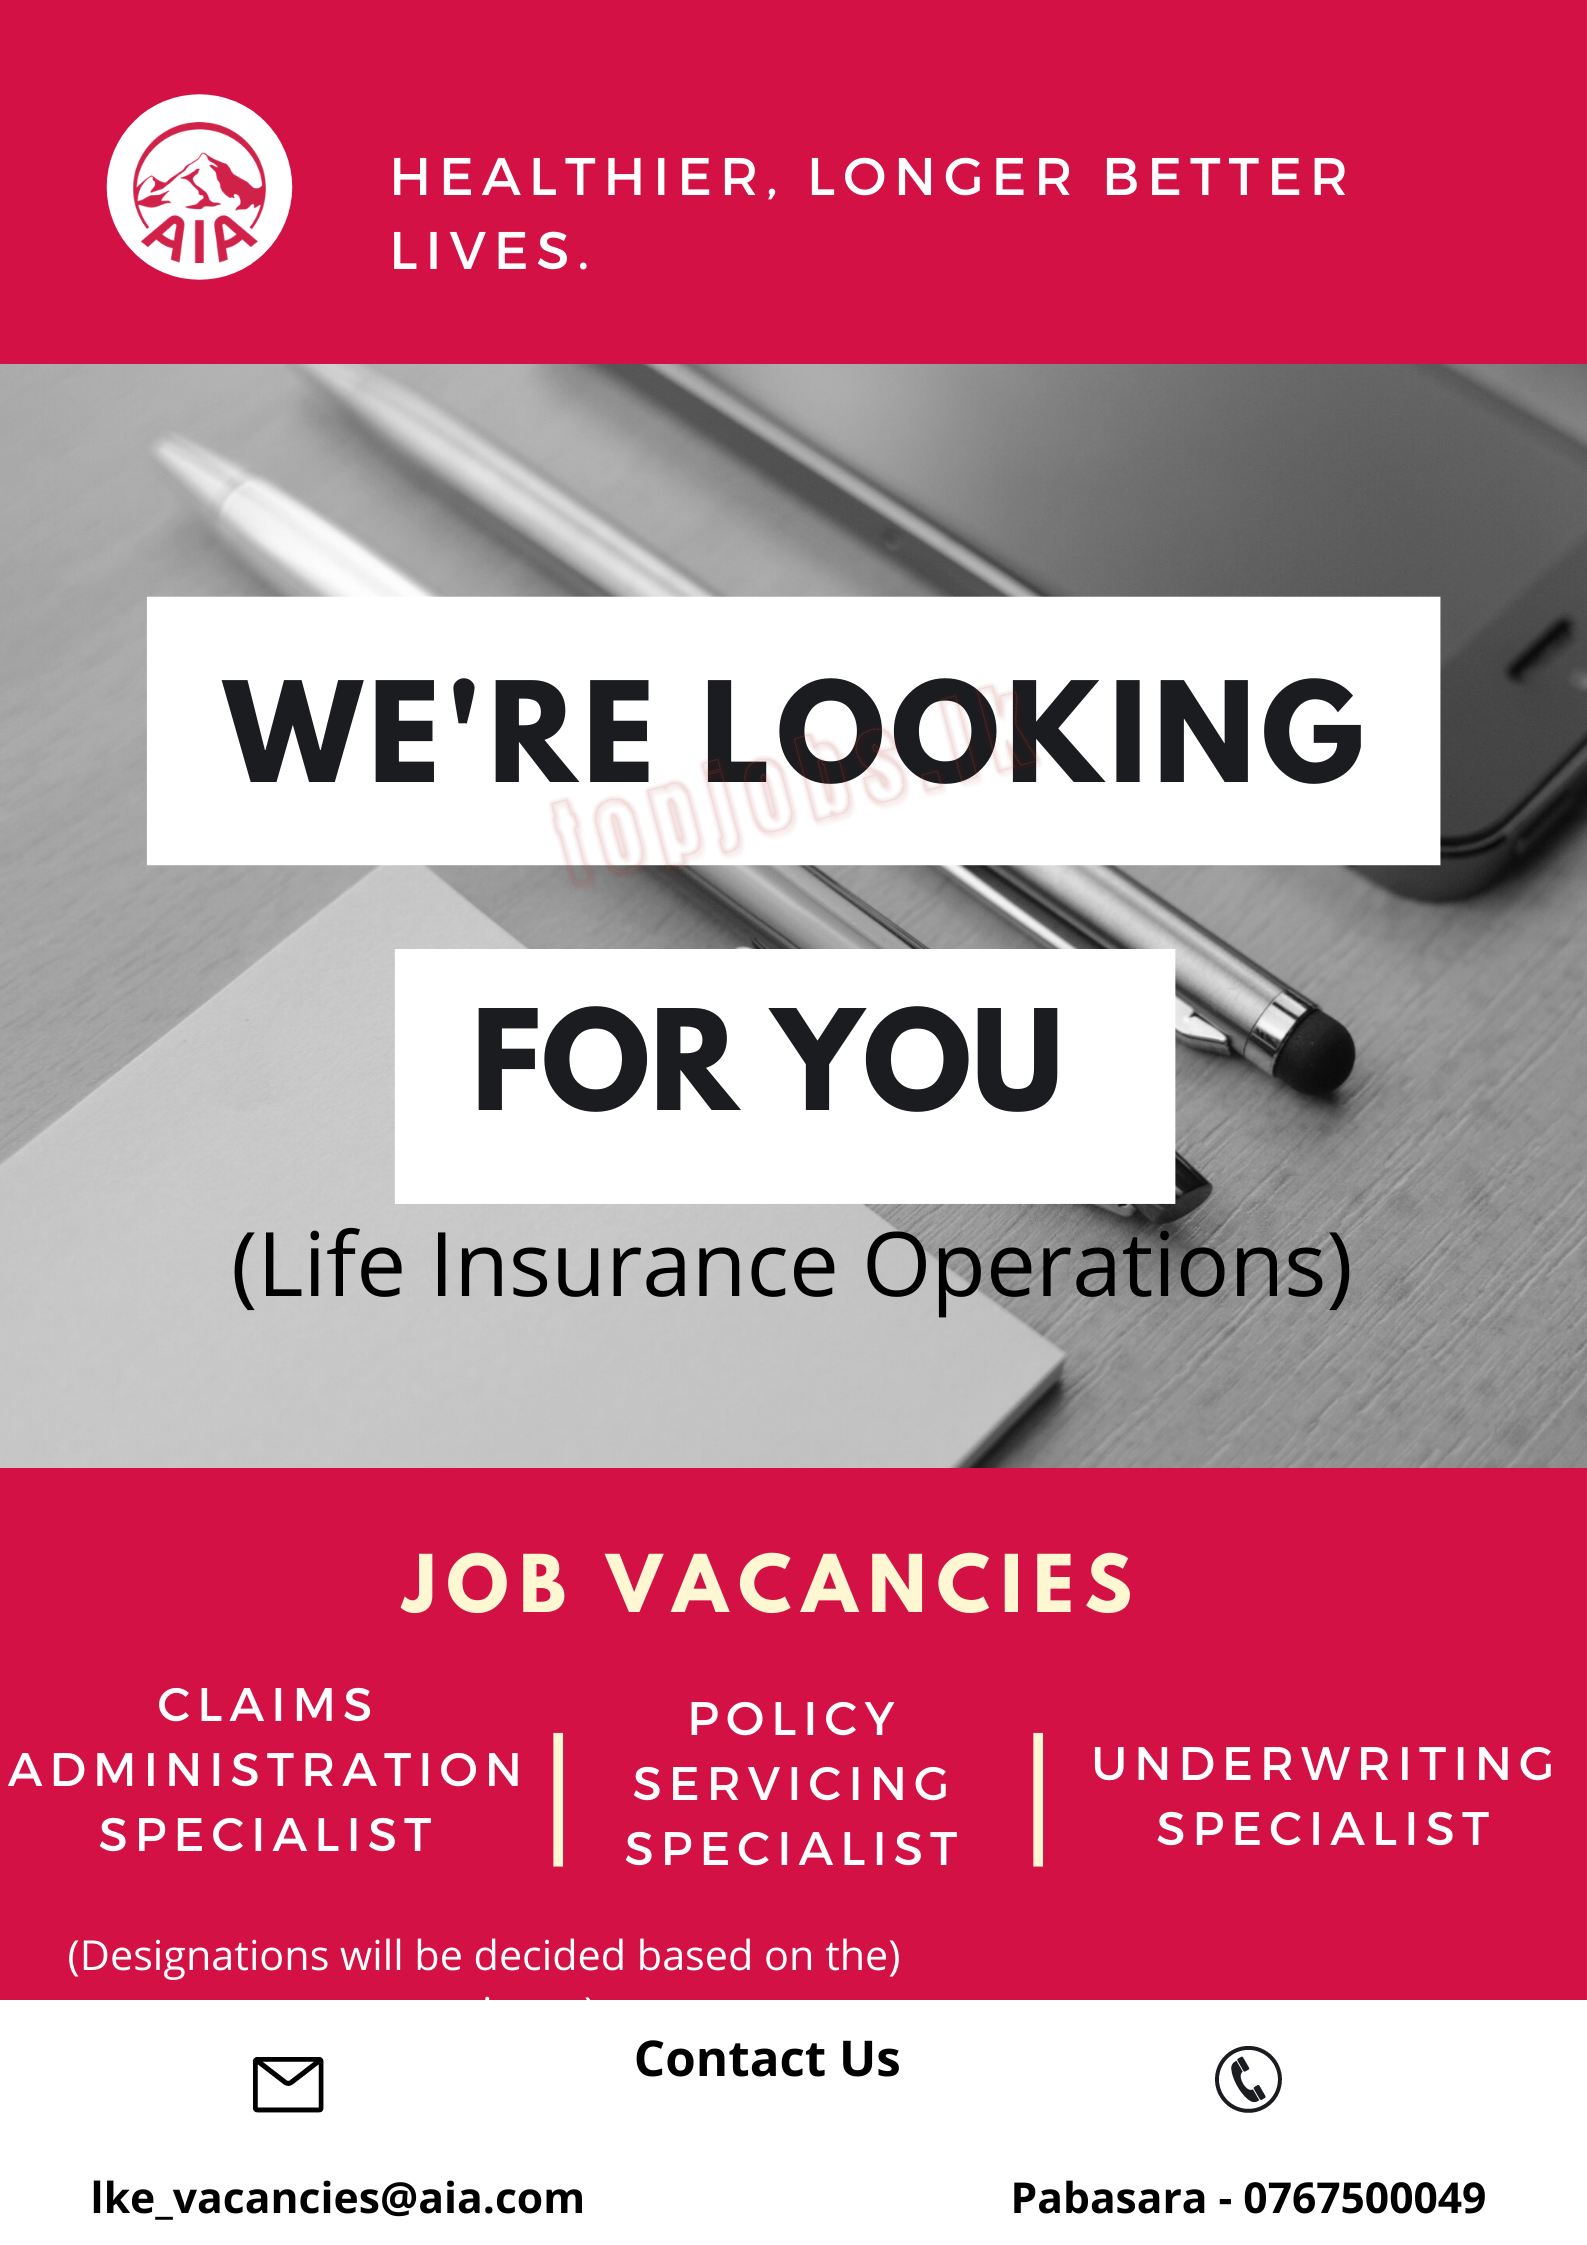 Claims Administration Specialist Policy Servicing Specialist Underwriting Specialist - AIA Insurance English Details